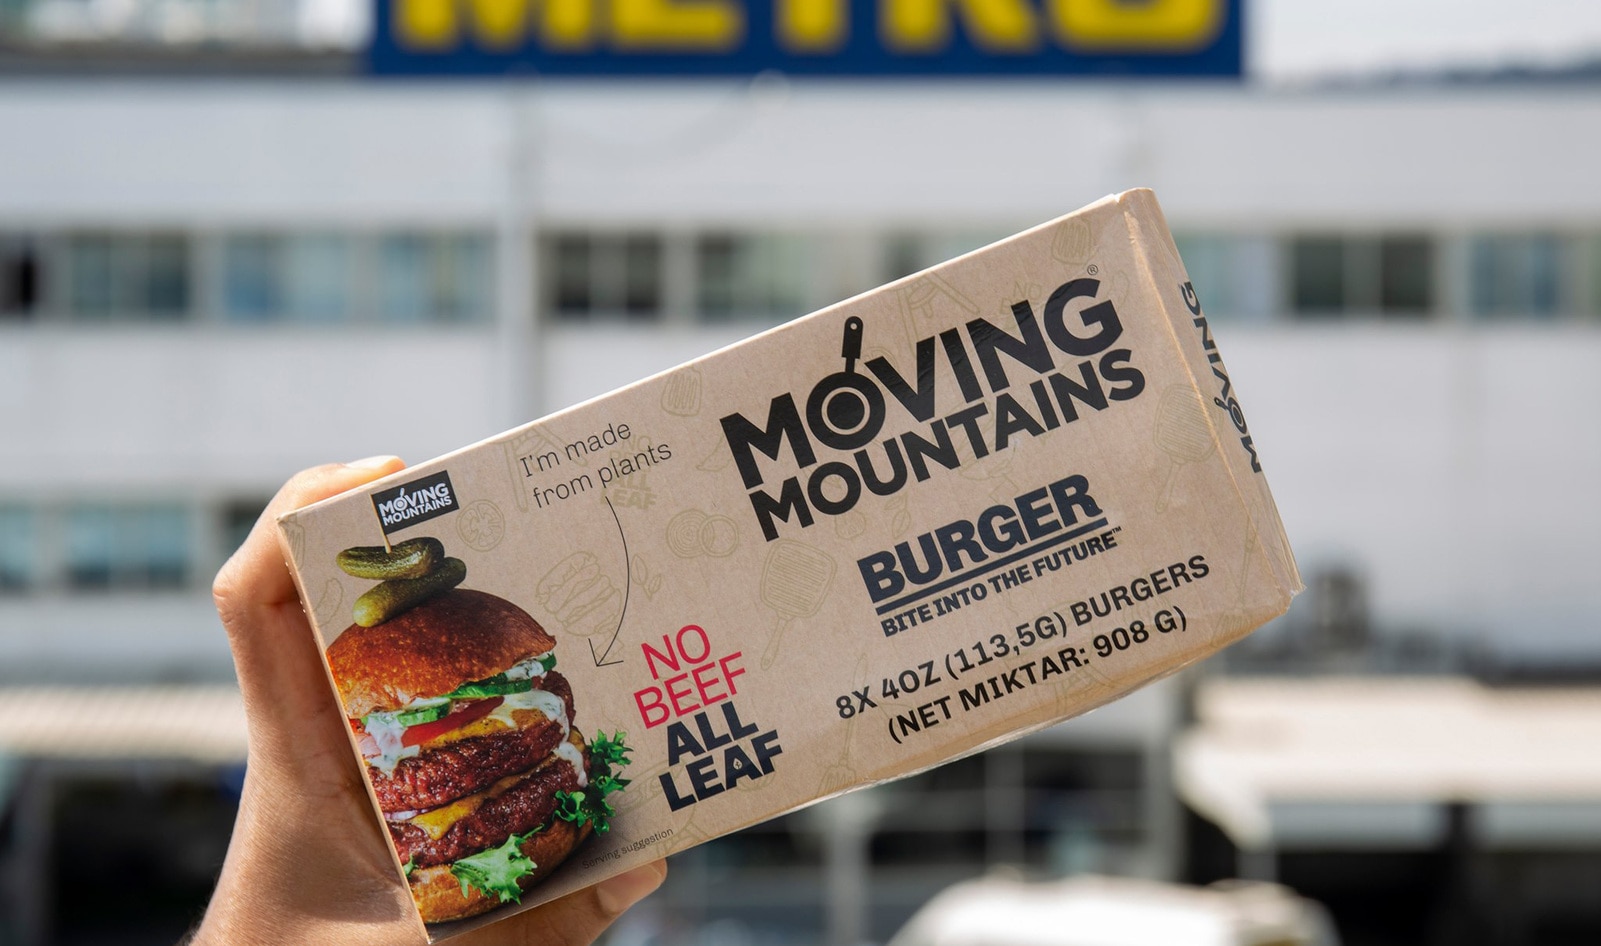 170,000 People Demand EU to Allow Use of “Burger” Labeling on Vegan Products